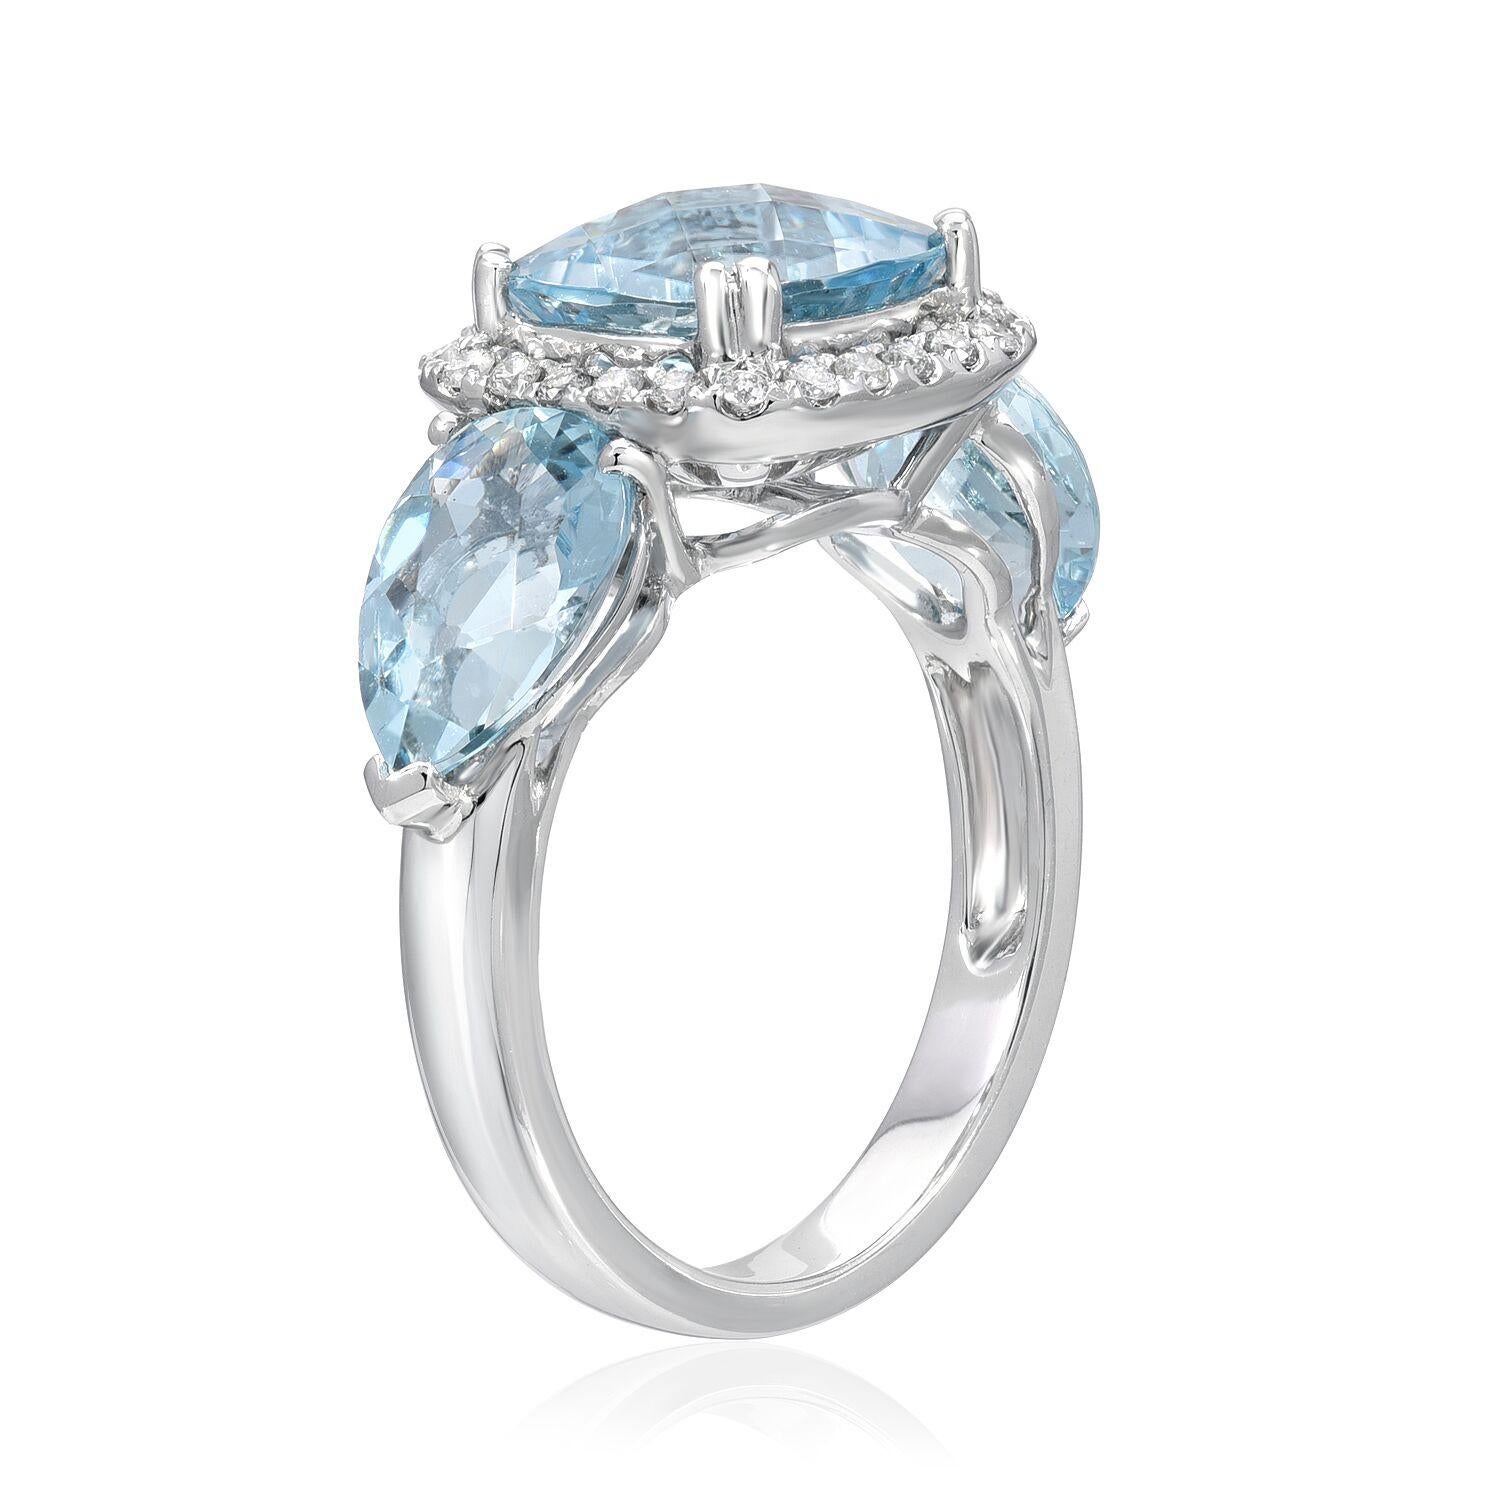 Gorgeous checkerboard cushion cut, and pear shaped Aquamarines weighing a total of 6.25 carats, are set in this 18K white gold three-stone ring, adorned by a total of 0.23 carats of round brilliant diamonds.
Ring size 6.5. Re-sizing is complimentary